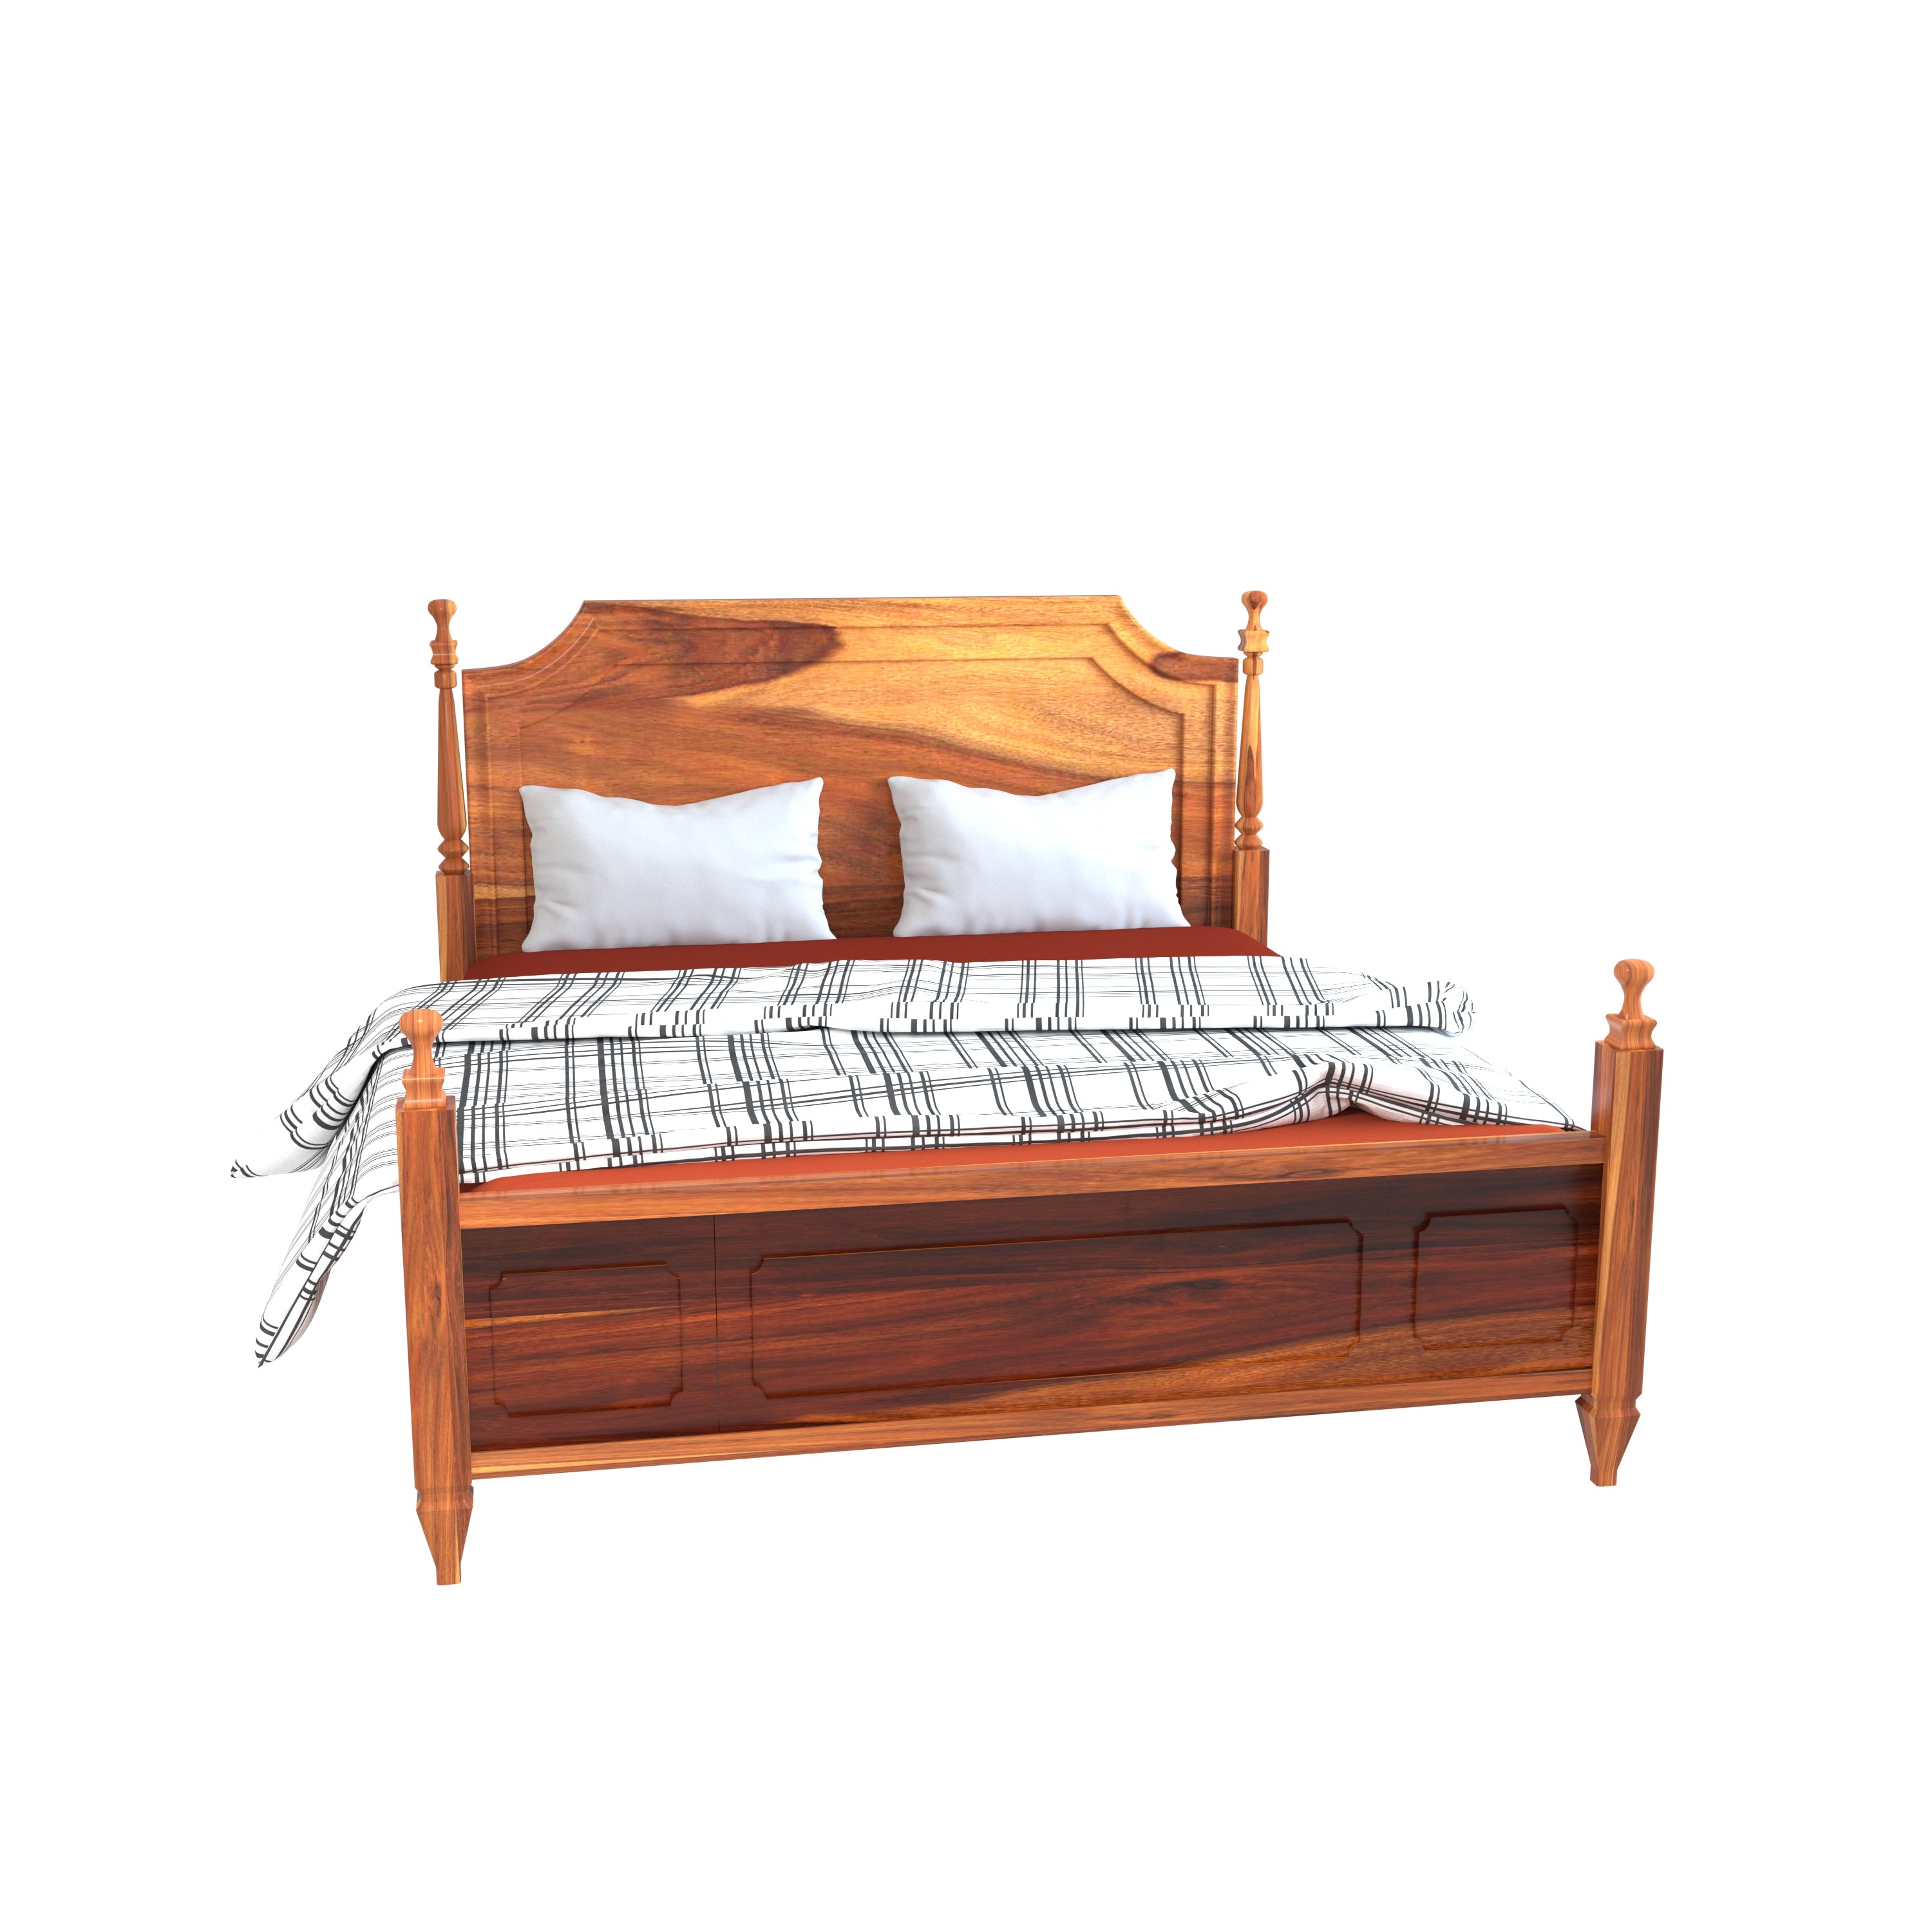 Classic Vintage Crown Styled Wooden Handmade Bed for Home Bed